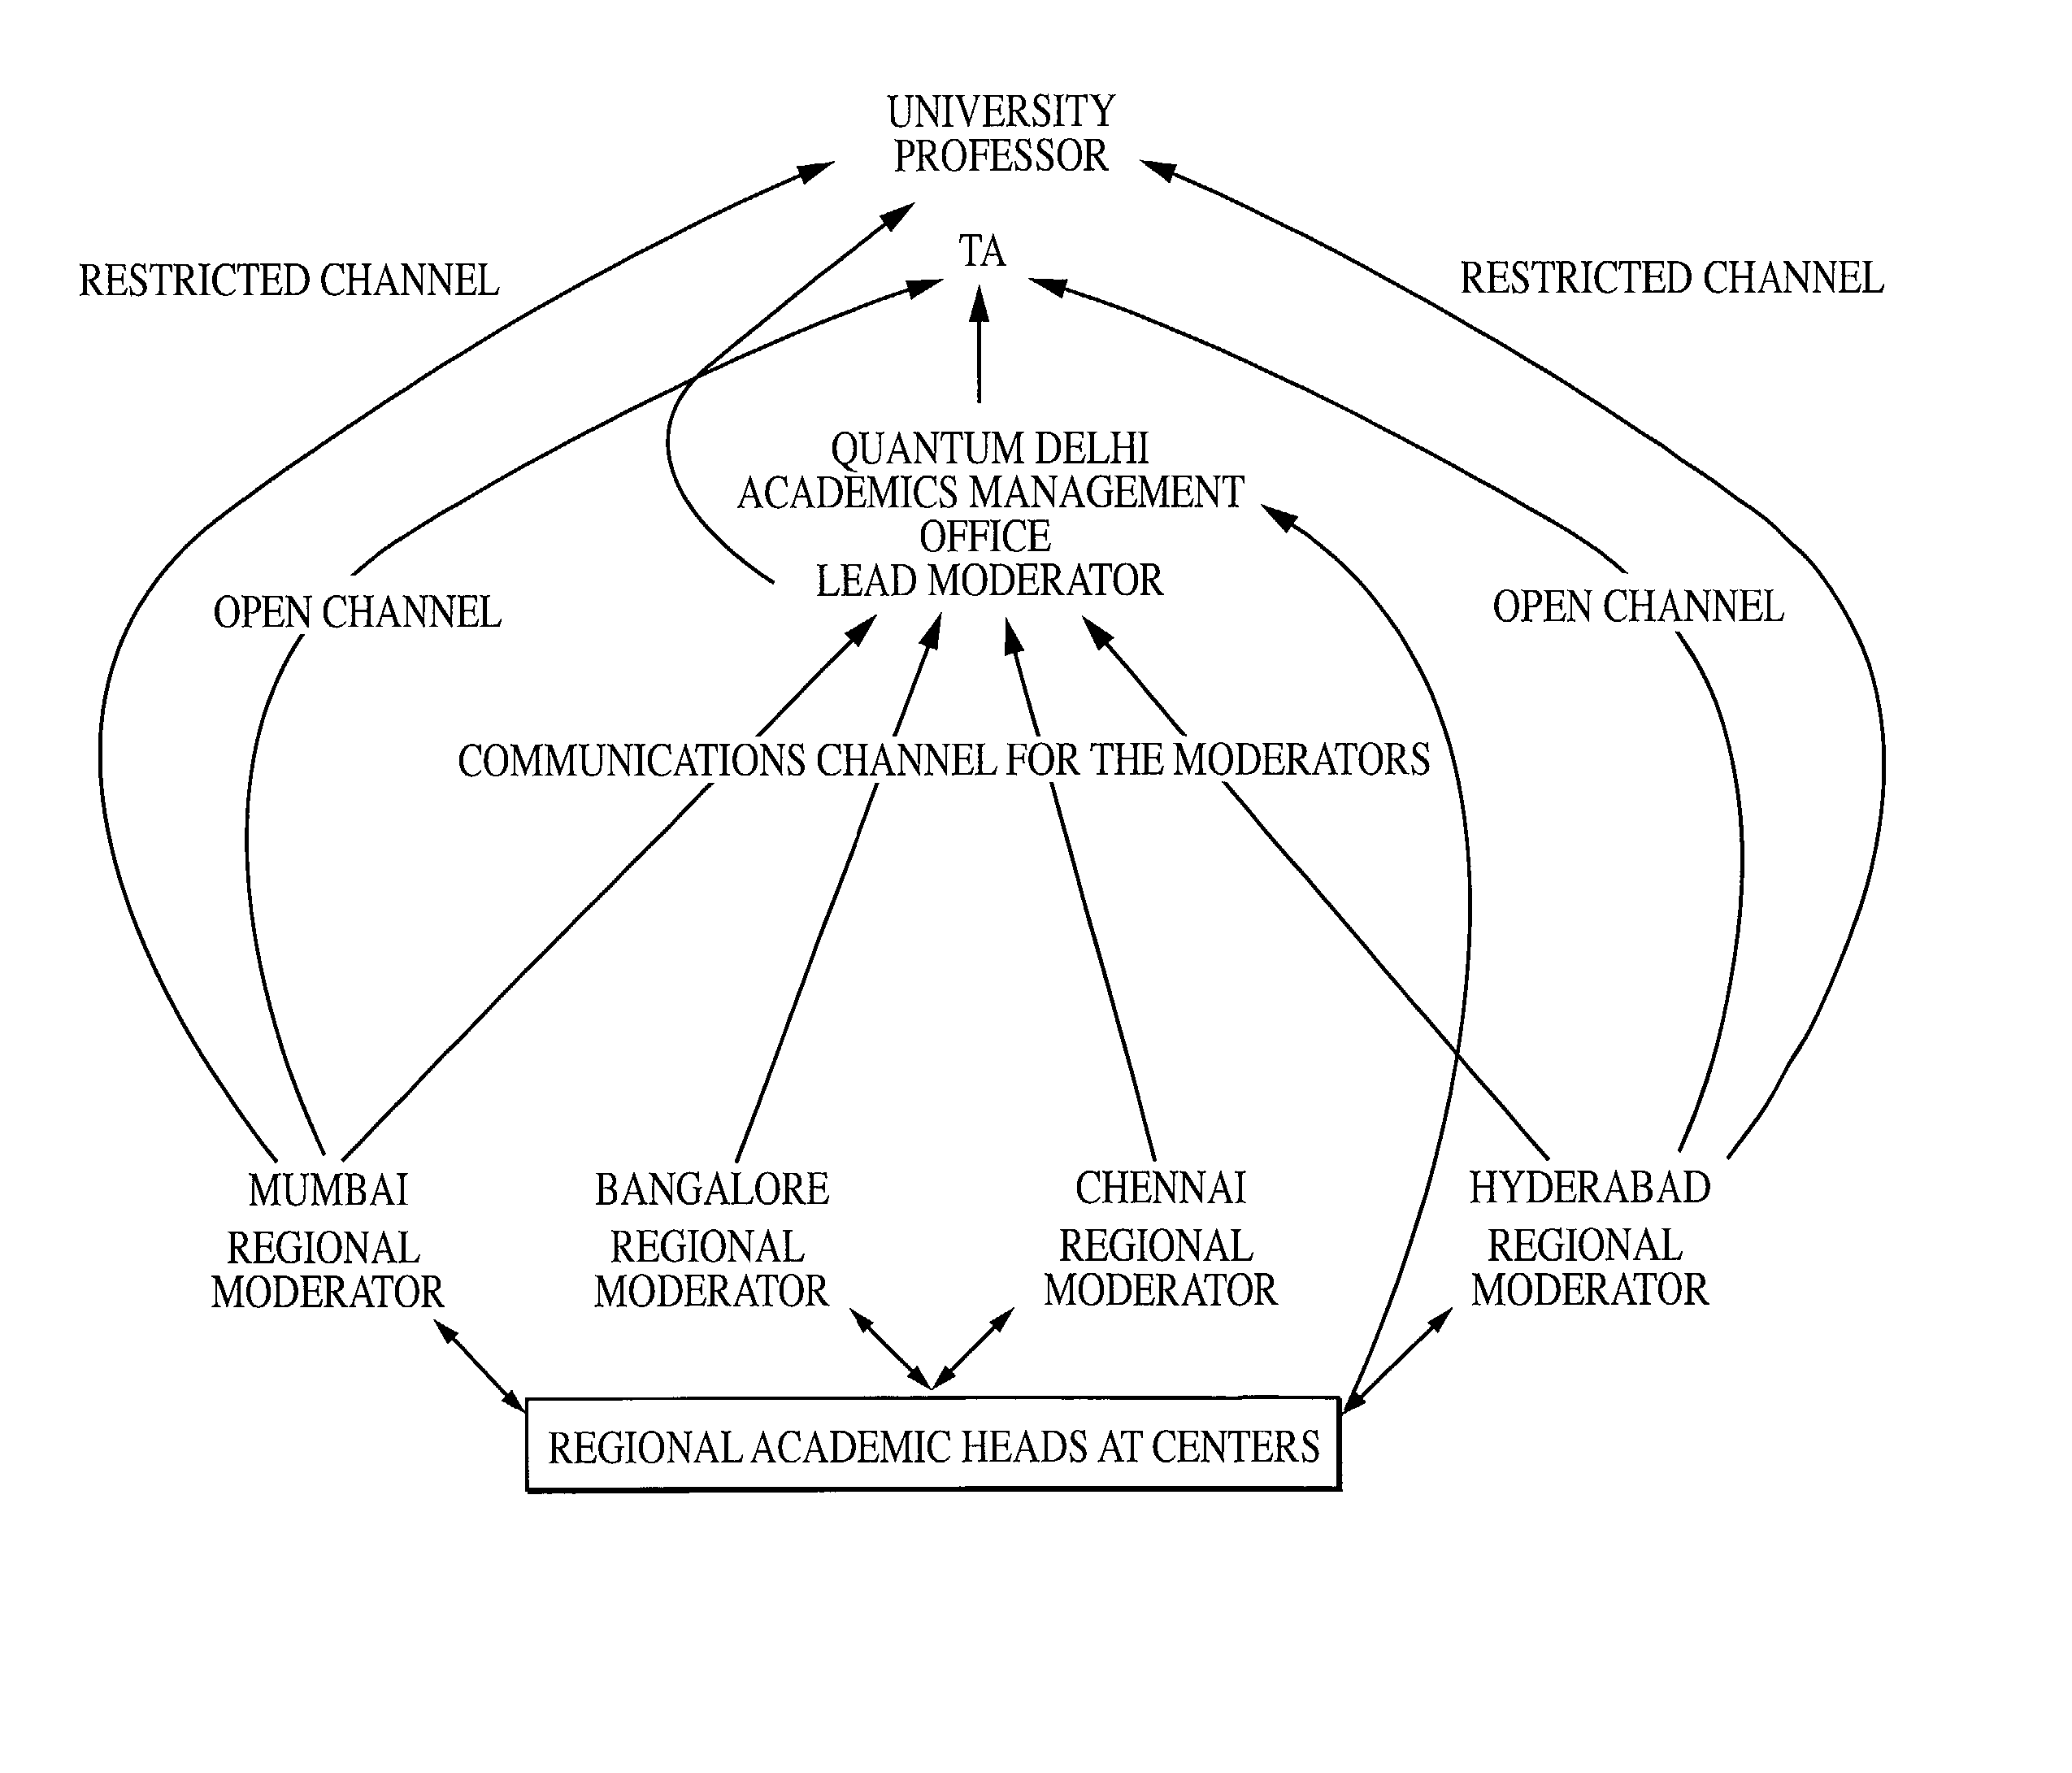 Method for imparting knowledge